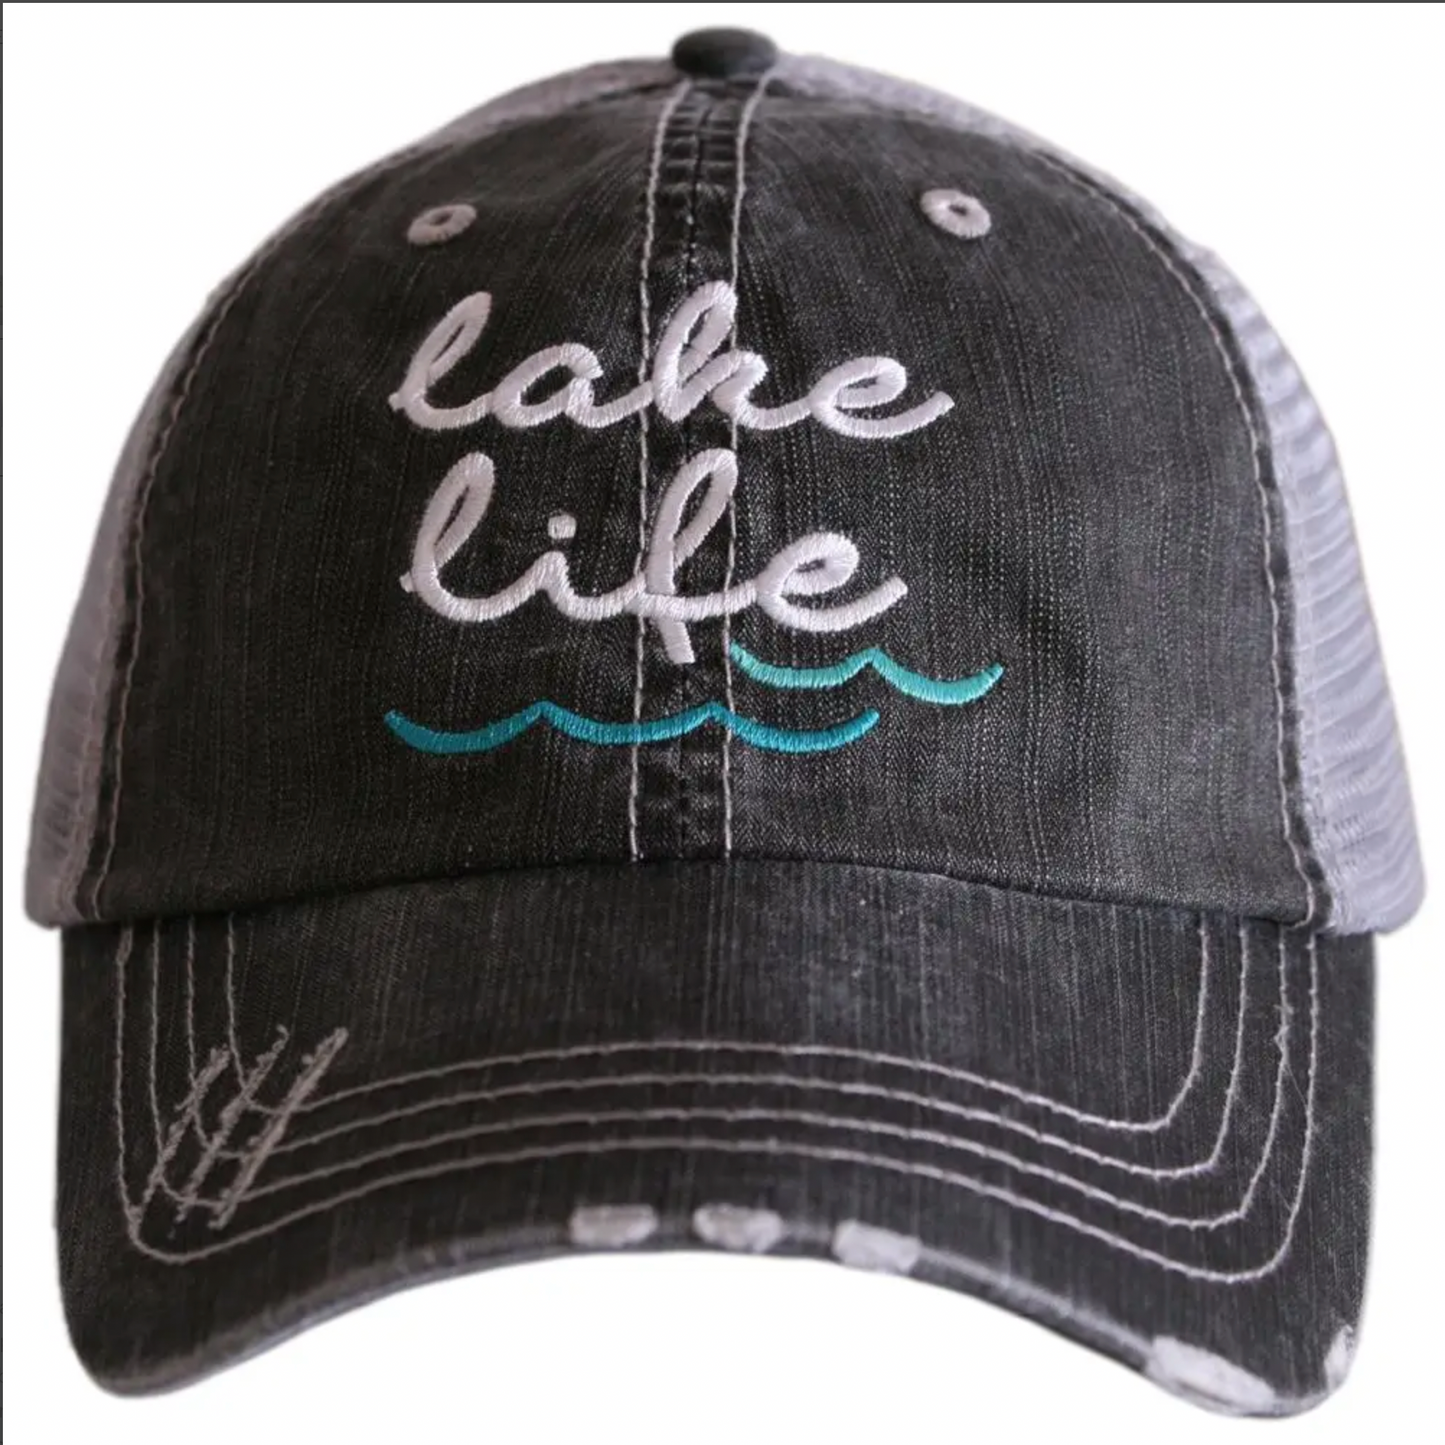 "Lake Life" Trucker Hat - The Street Boutique 